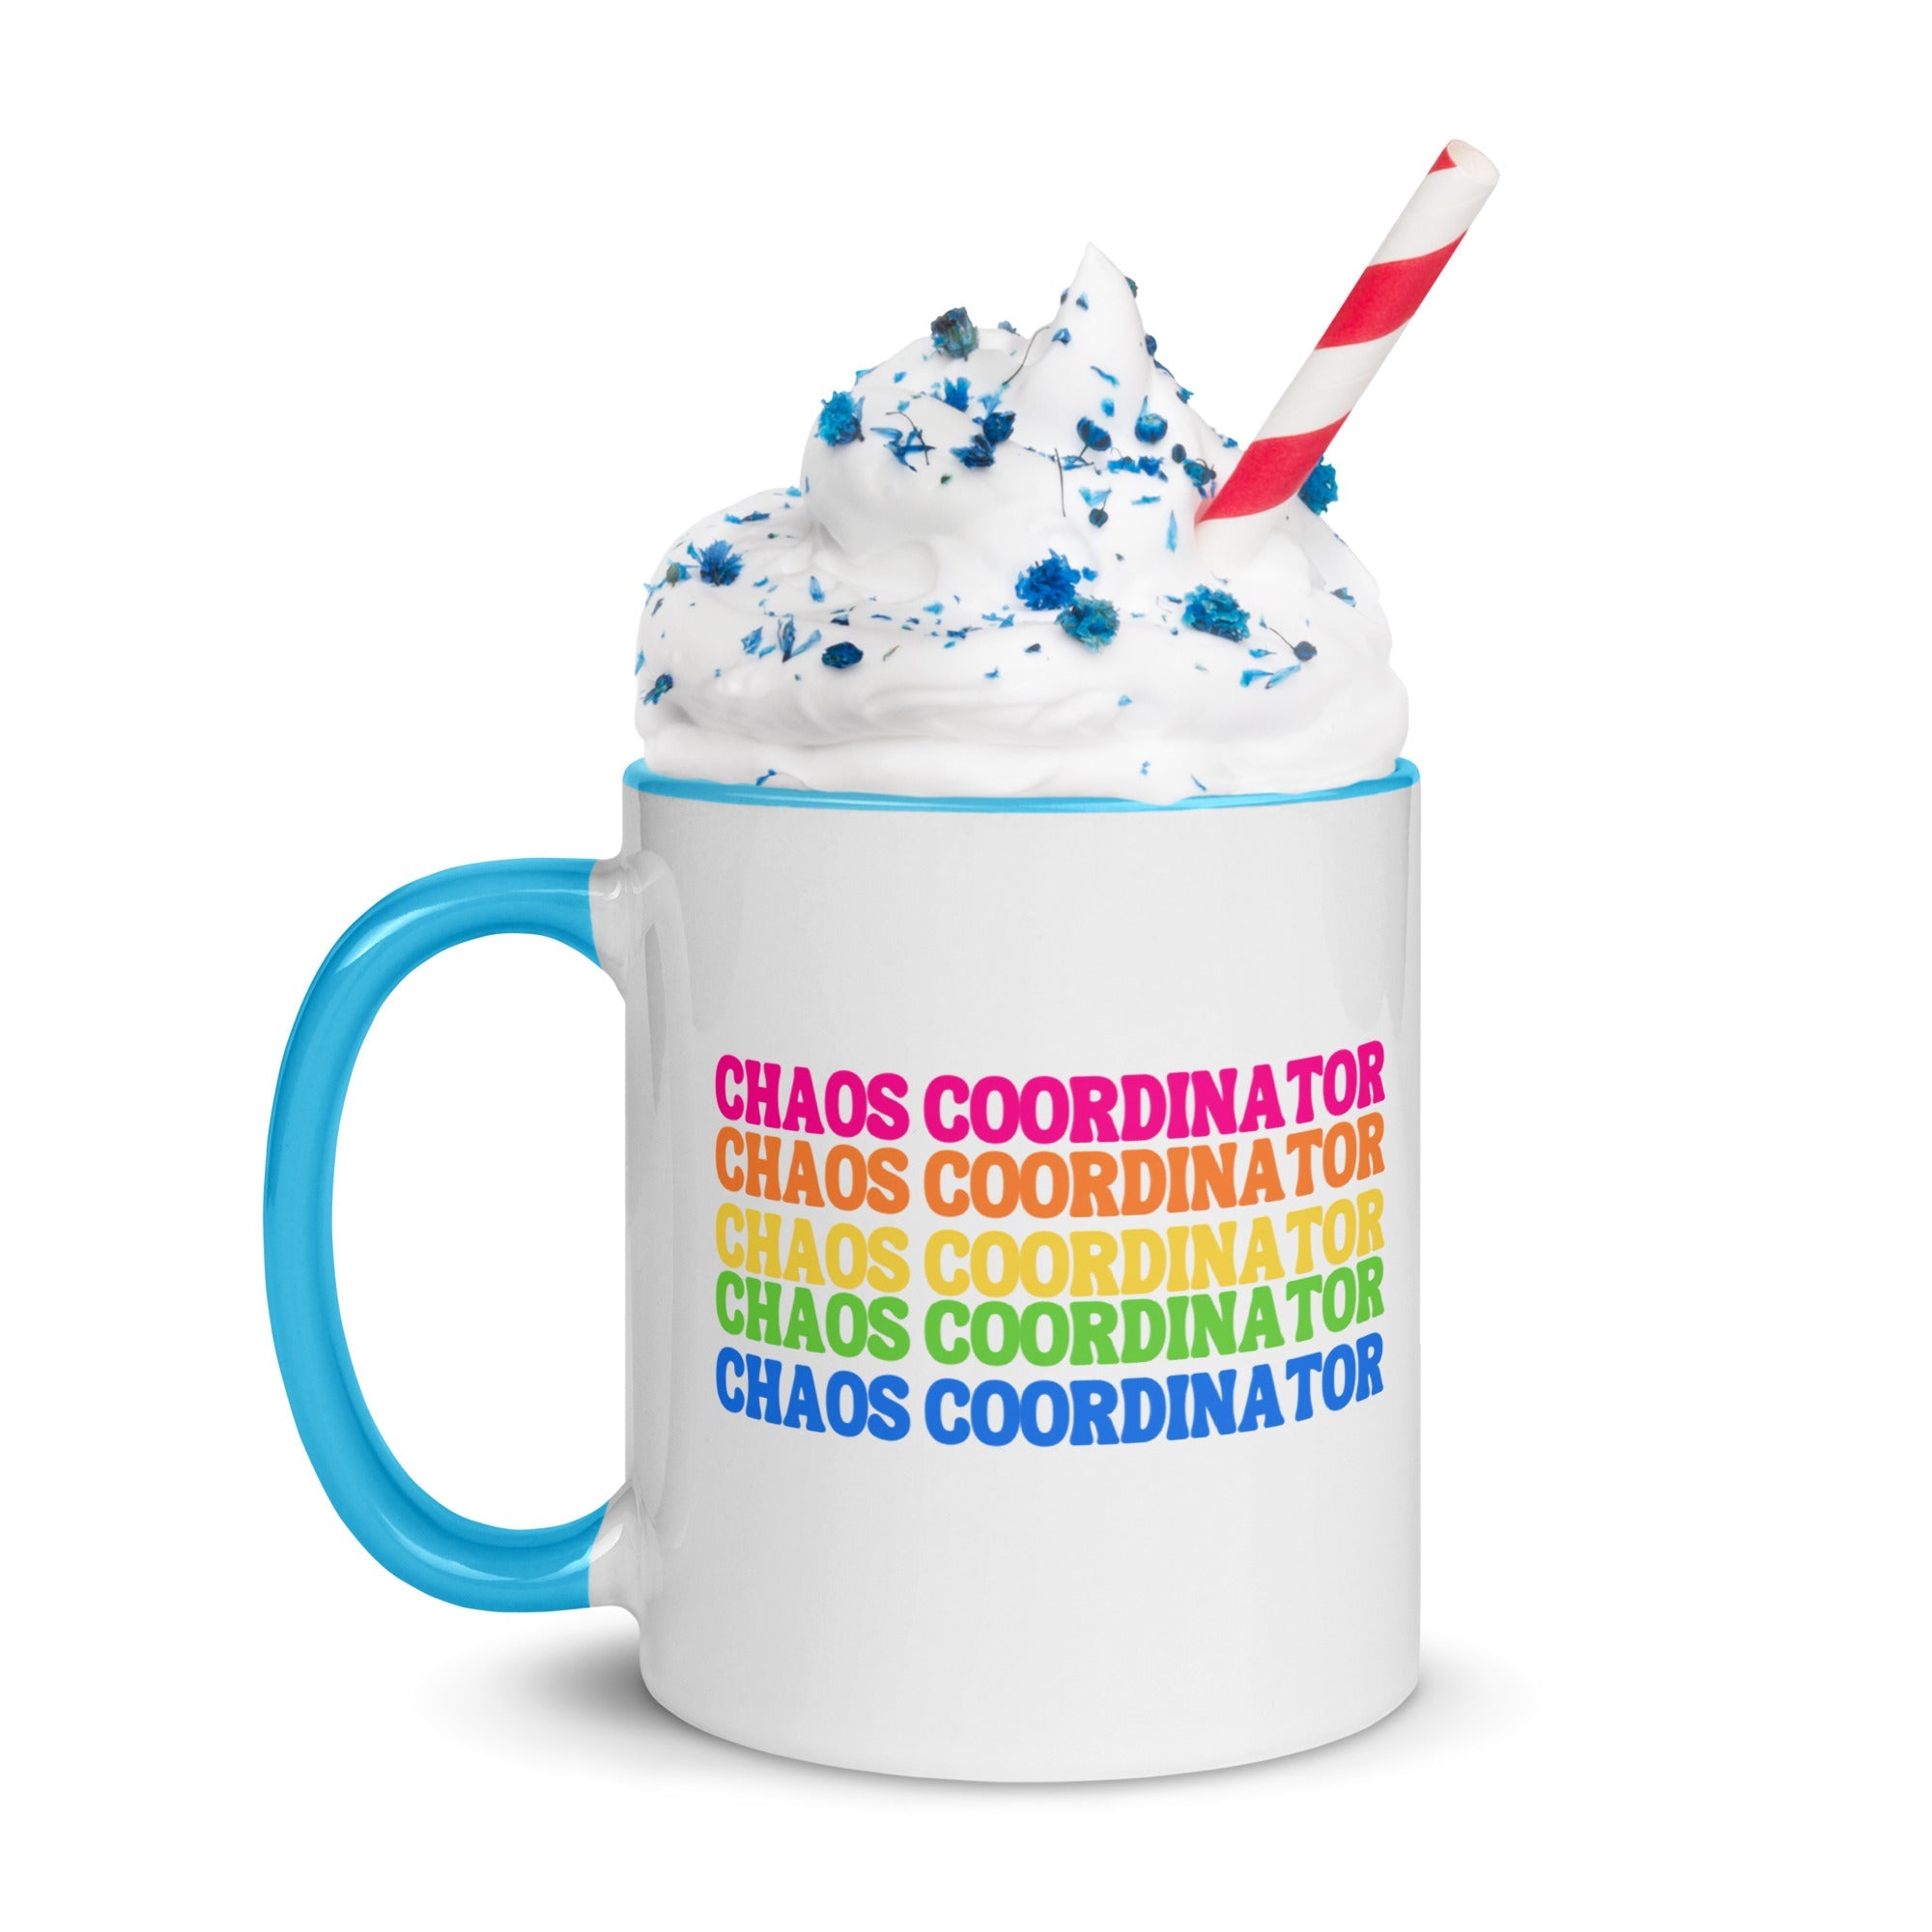 Chaos Coordinator Mug with Colorful Accents - The Kindness Cause